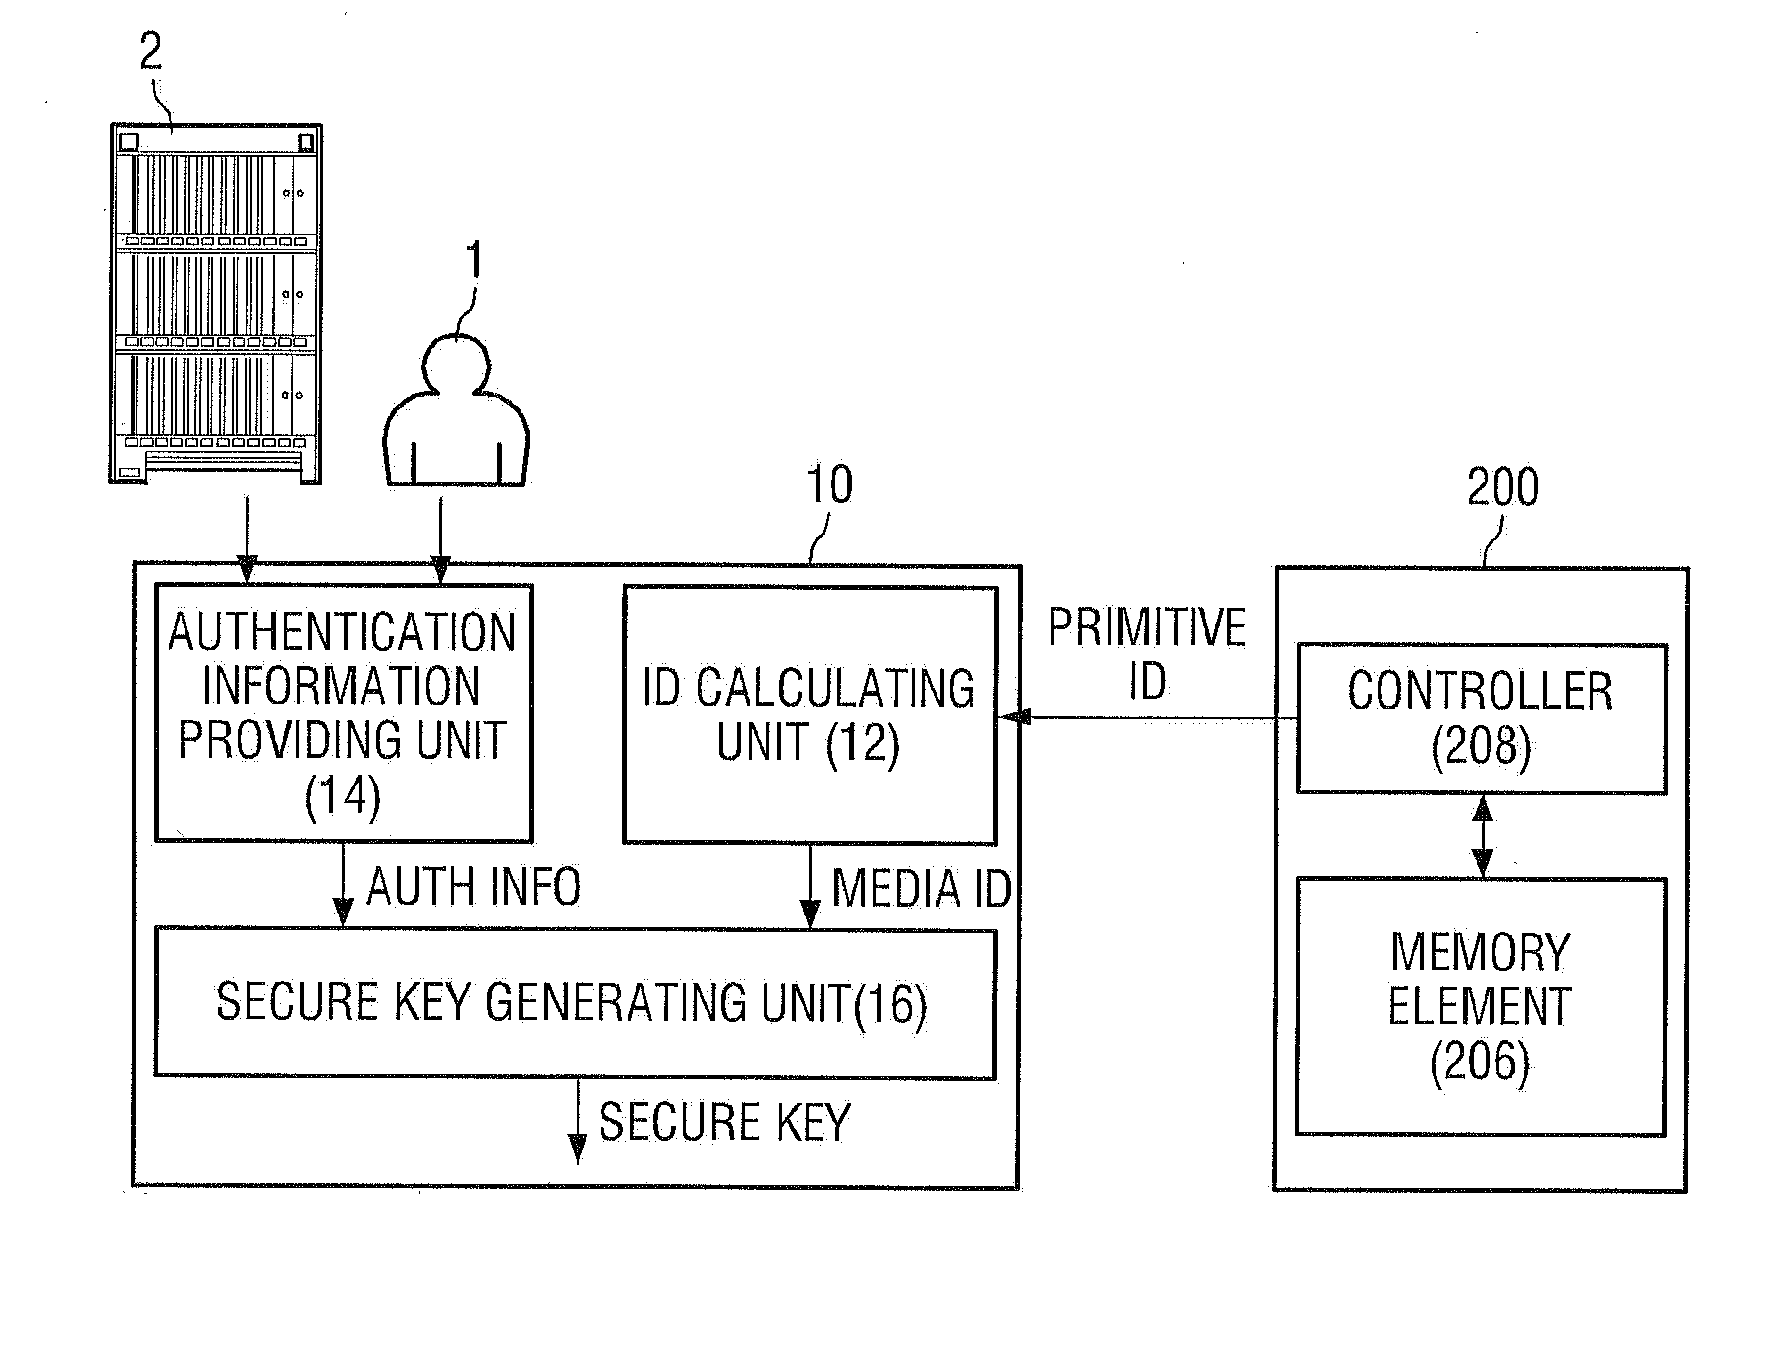 Apparatus for generating secure key using device and user authentication information